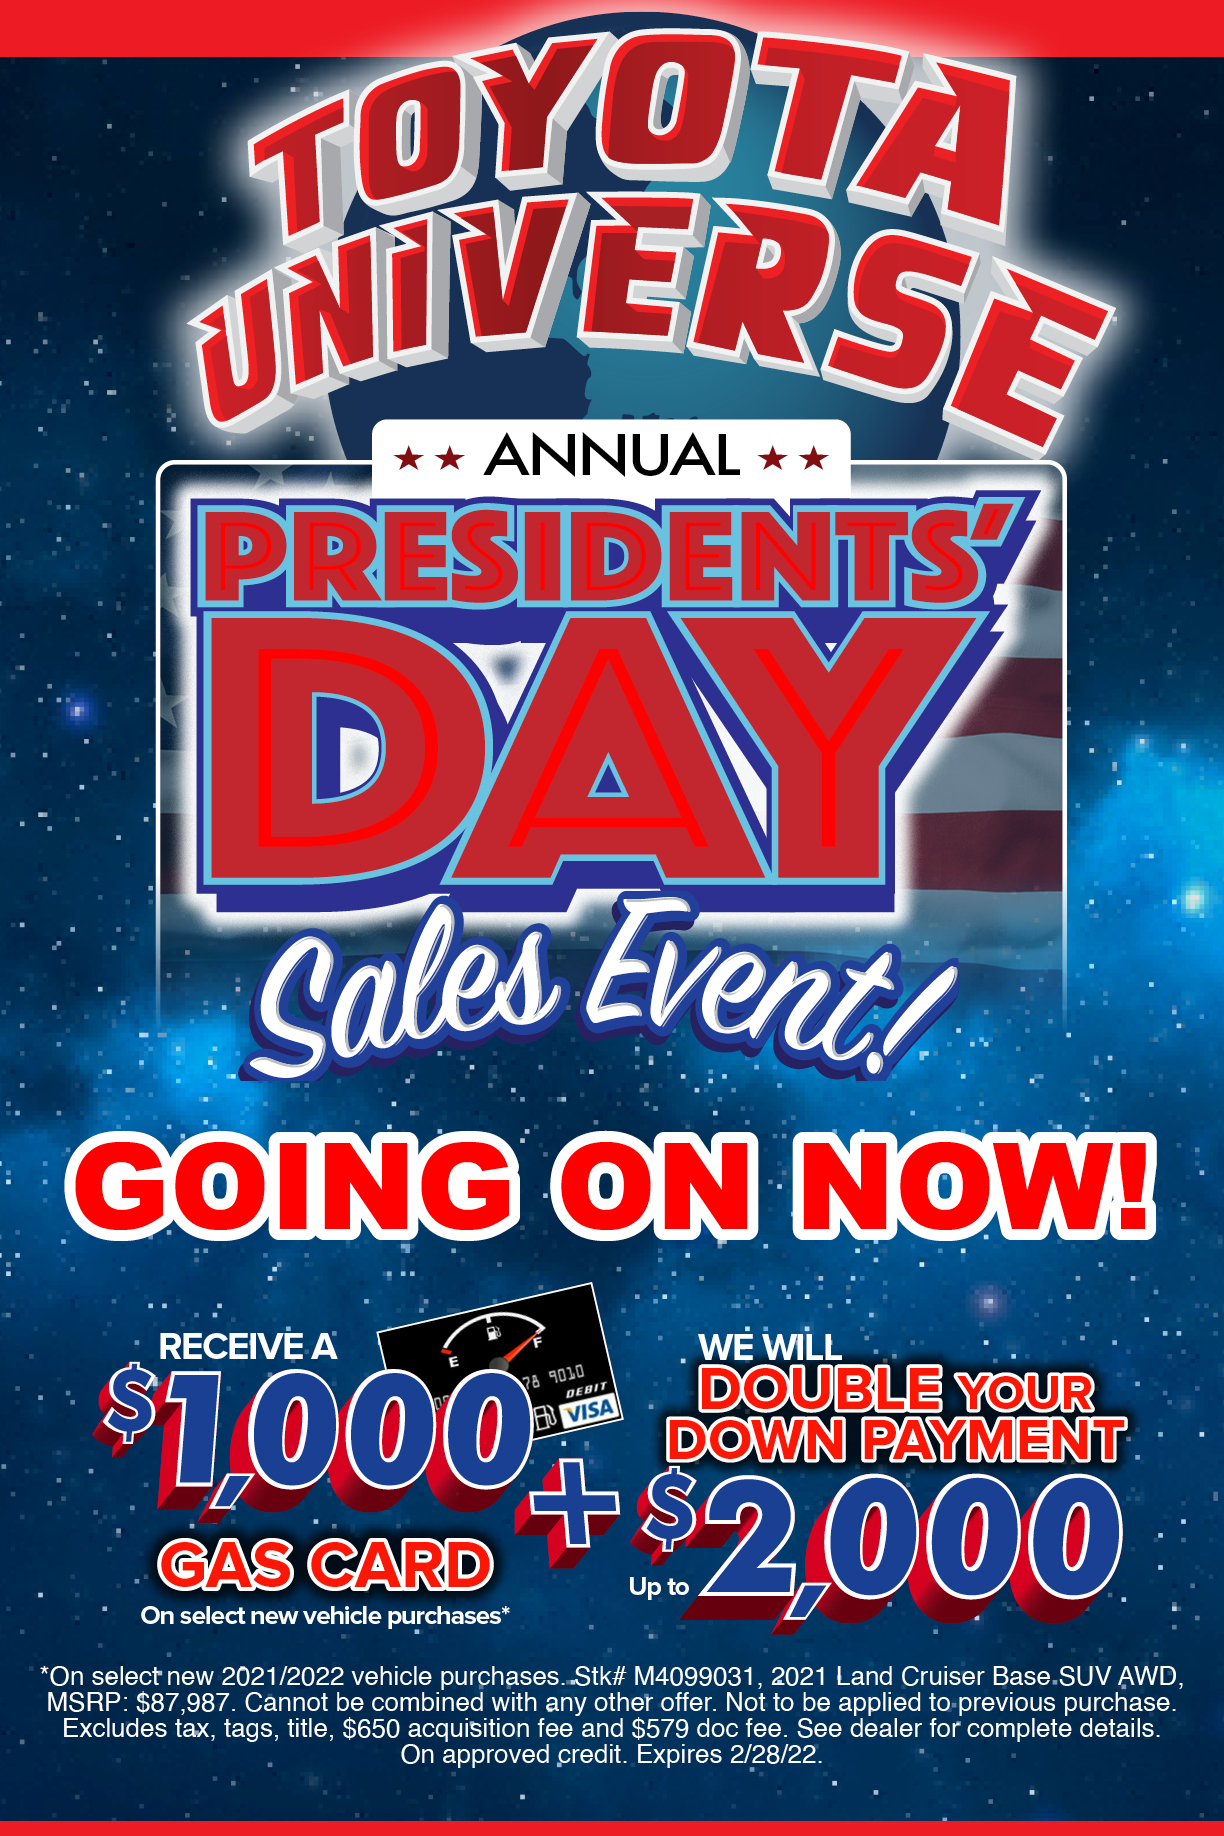 Presidents Day Sales Event Toyota Universe